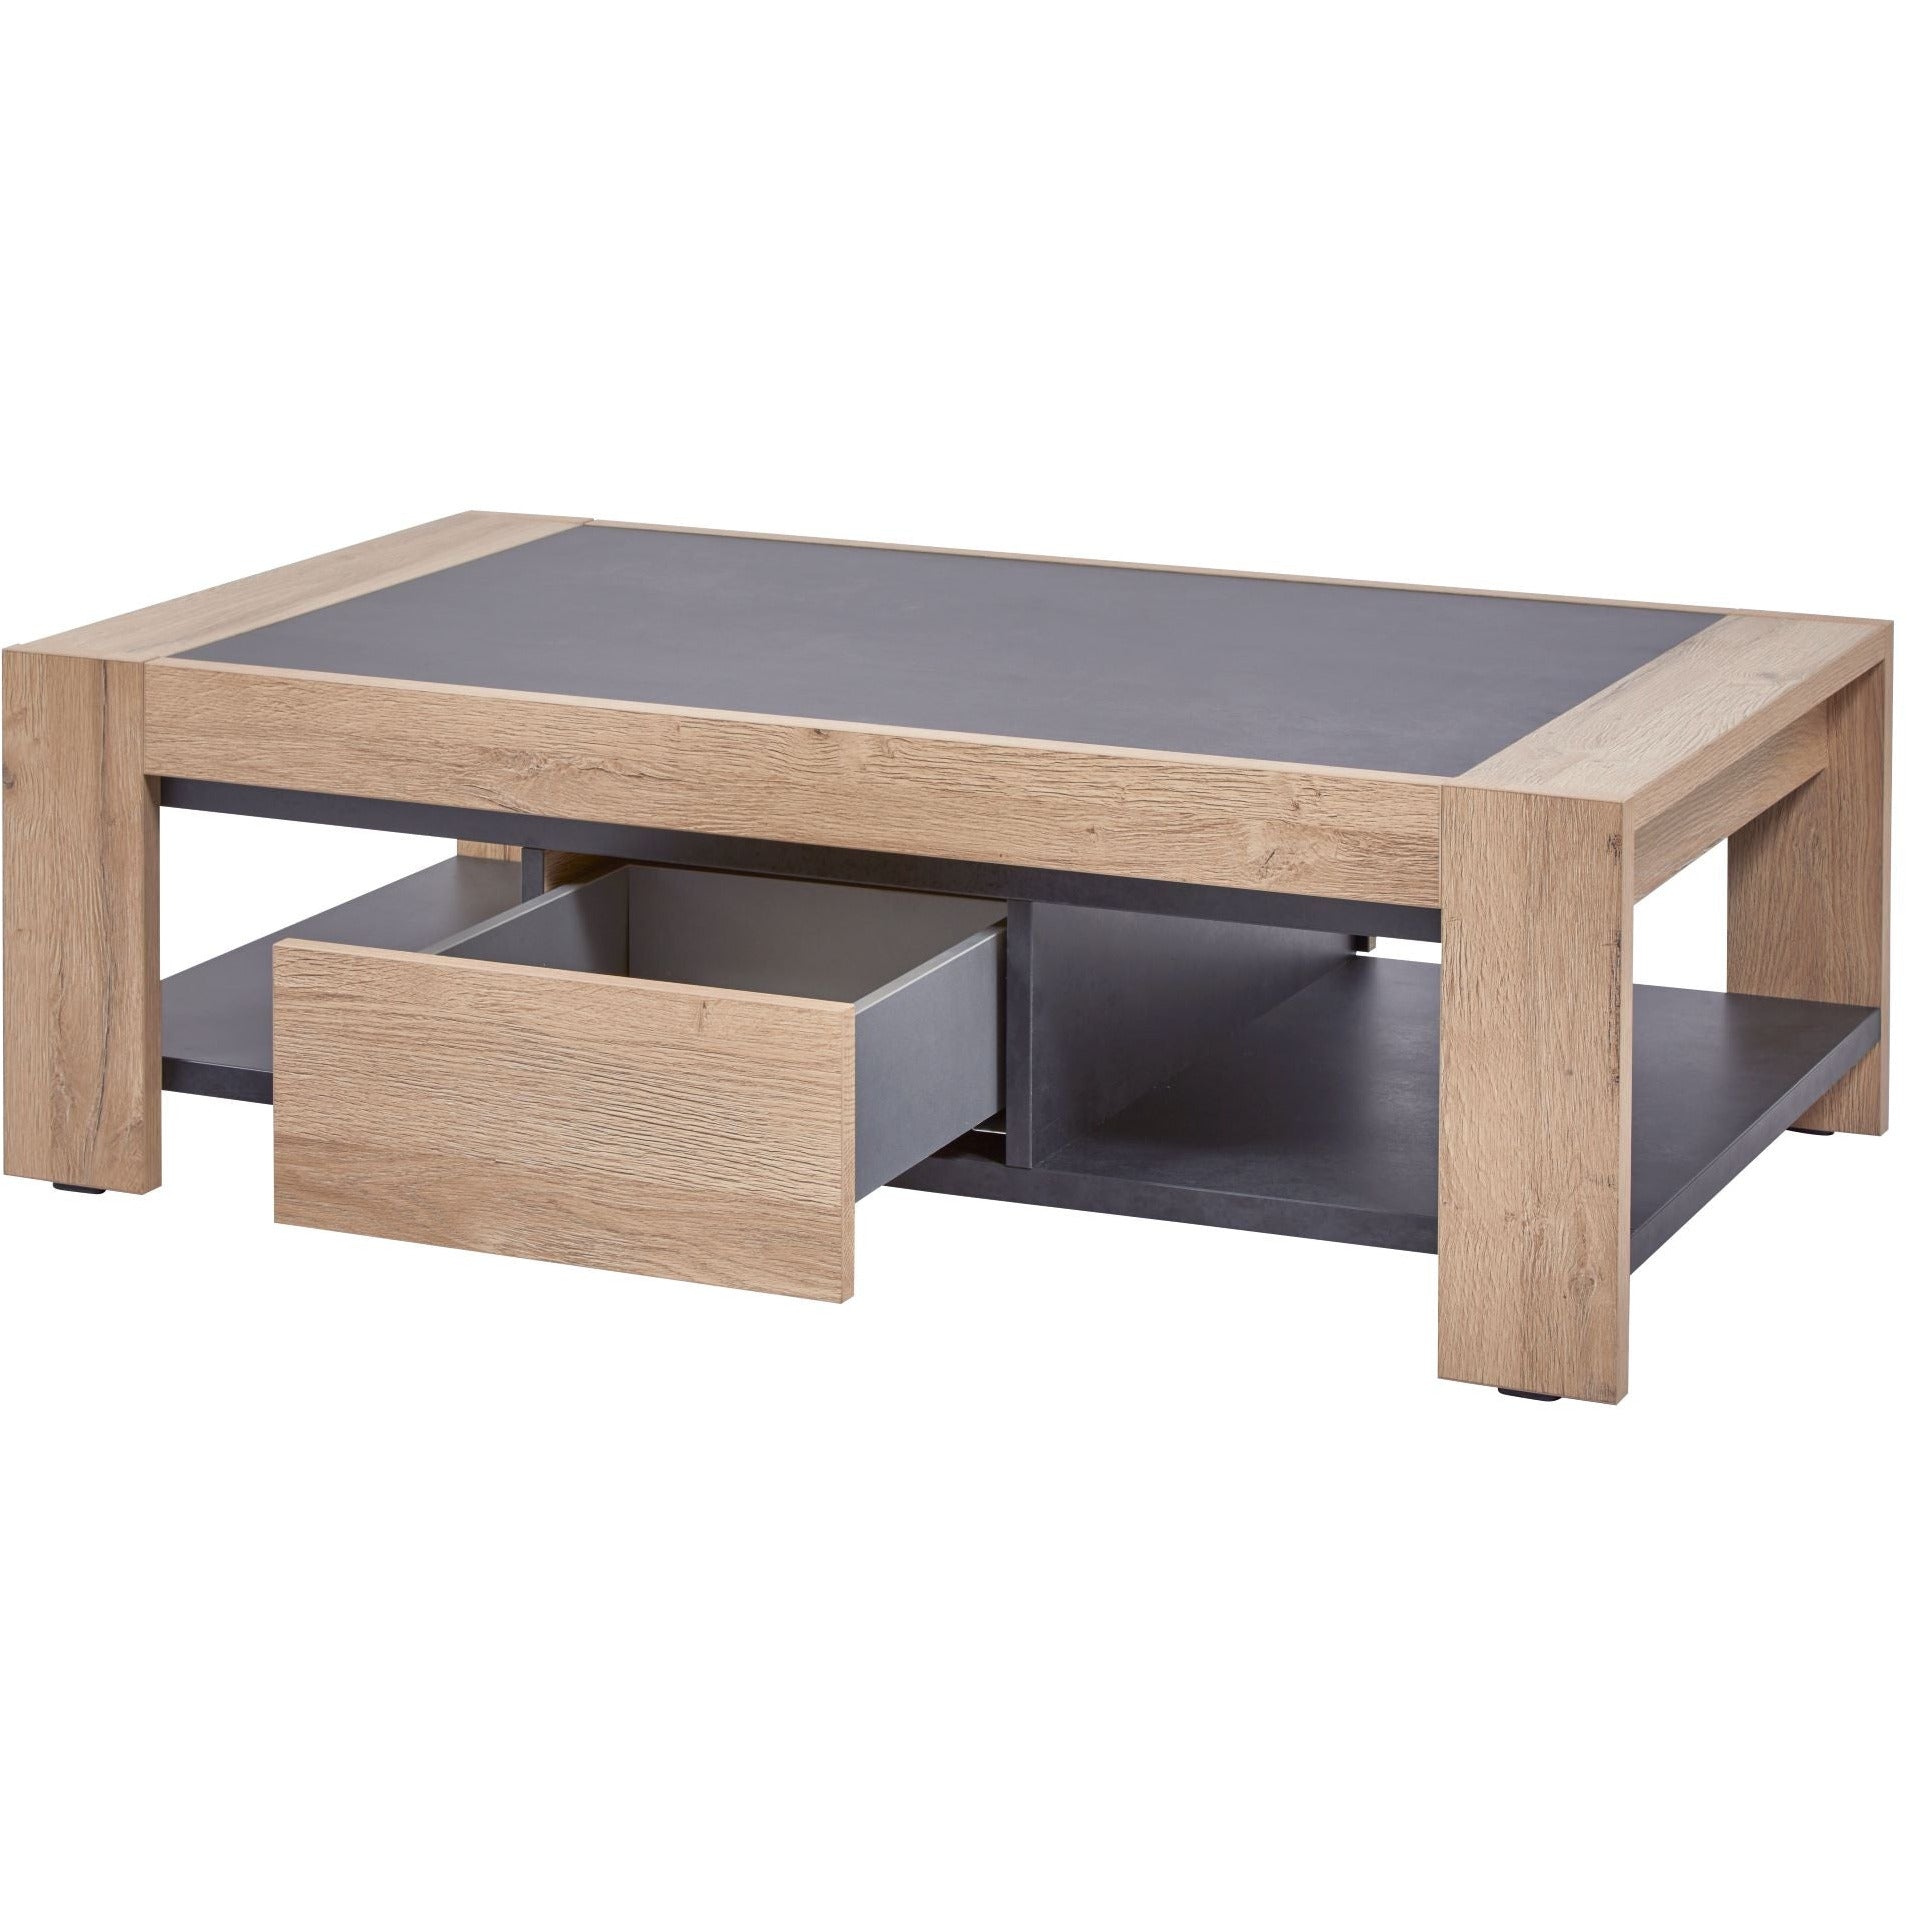 Coffee table | Furniture series Fugue | Natural, gray, brown | 120